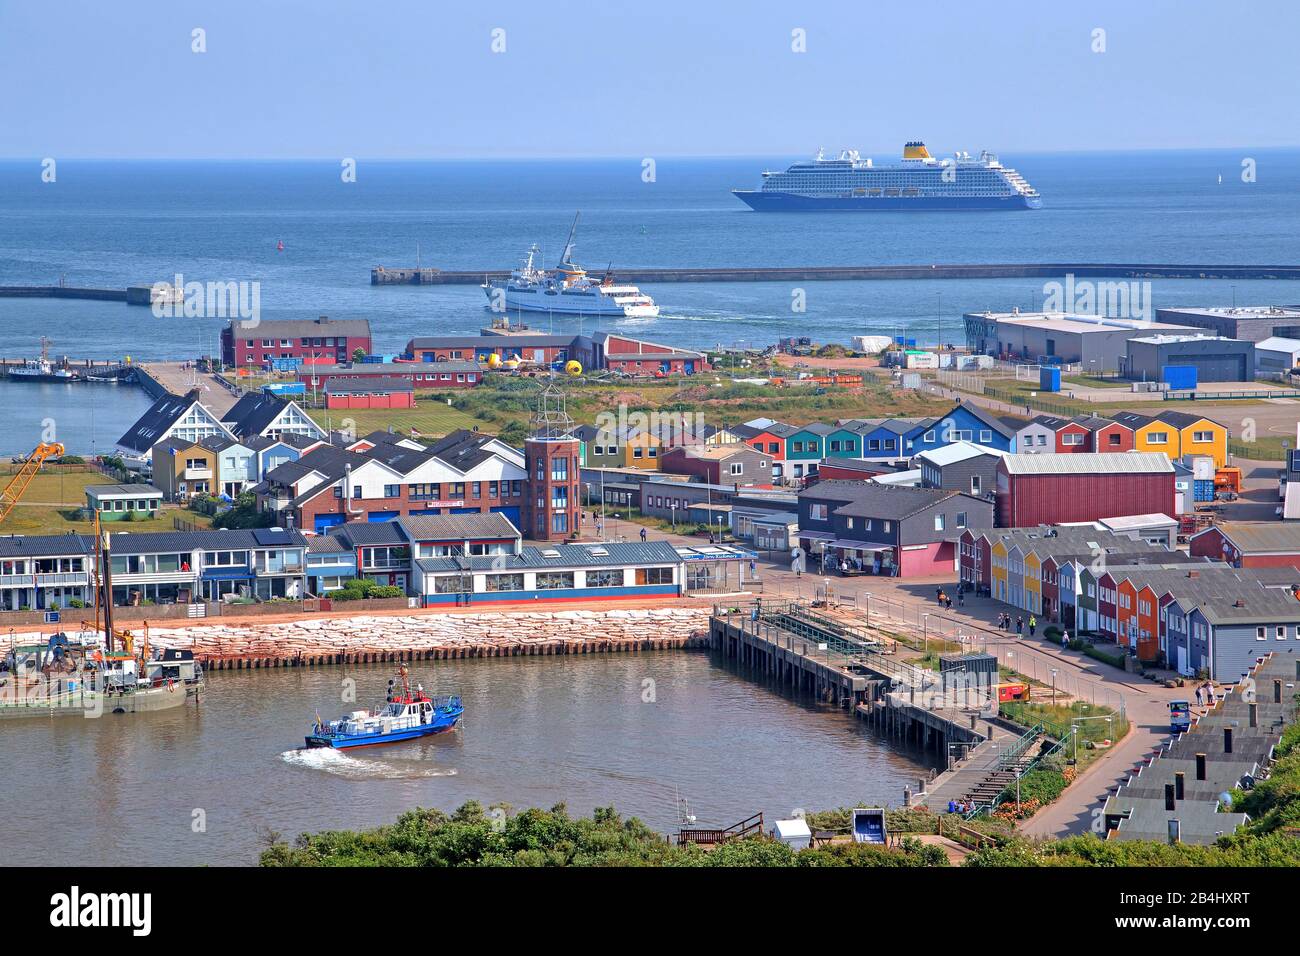 South port with sea resort Helgoland and cruise ship on the road in front of the island Helgoland, Helgoland Bay, German Bight, North Sea island, North Sea, Schleswig-Holstein, Germany Stock Photo